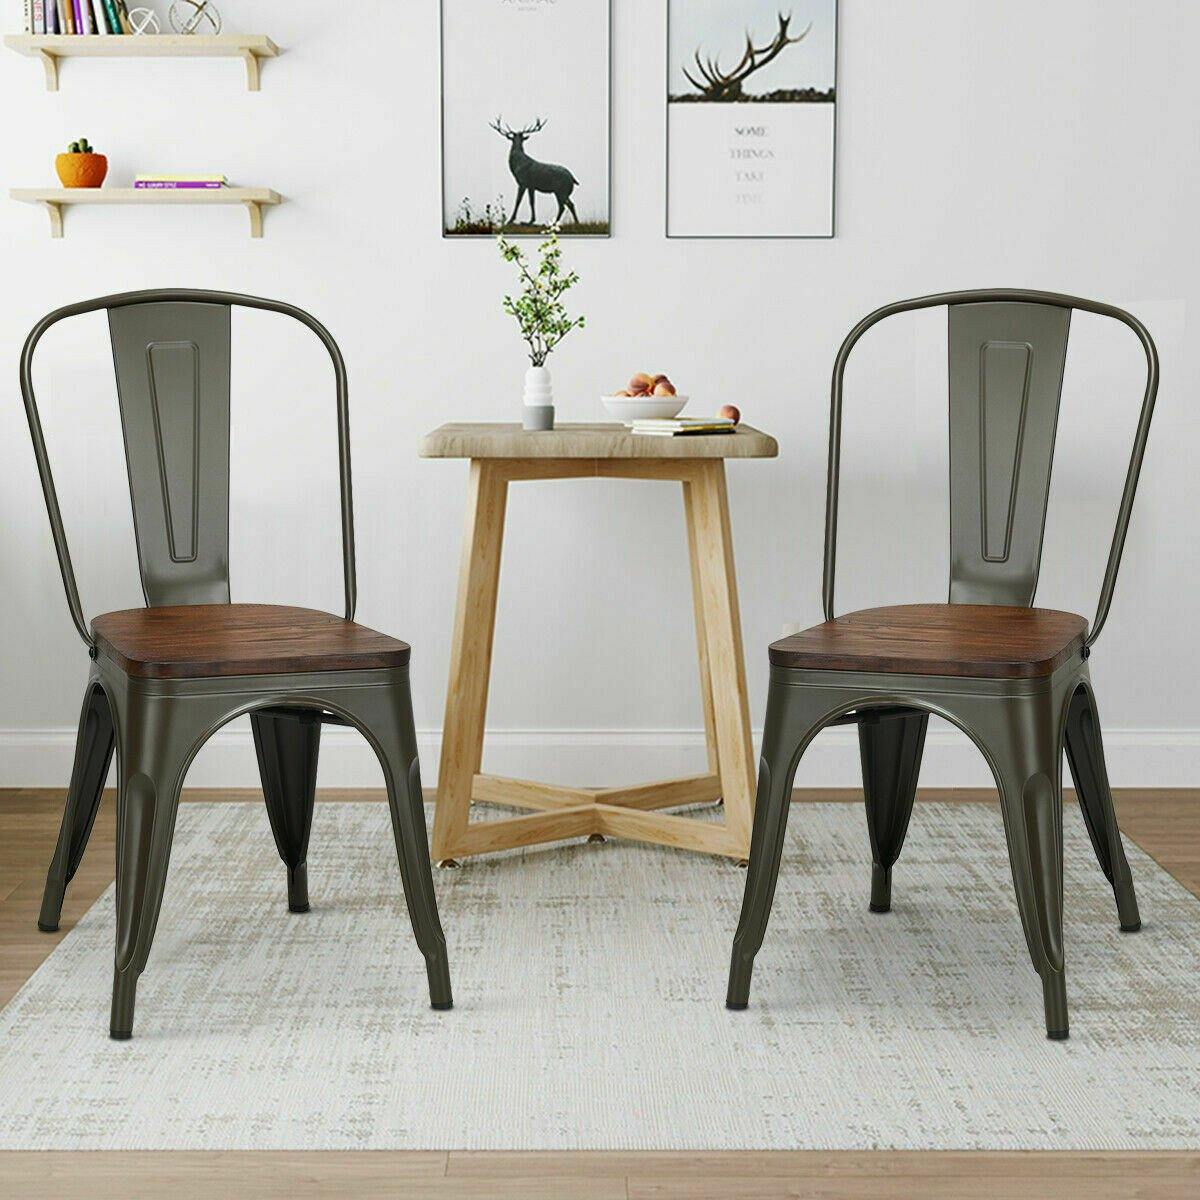 Set of 4 Metal Wood Dining Chair of Stackable Tolix Style - Bosonshop